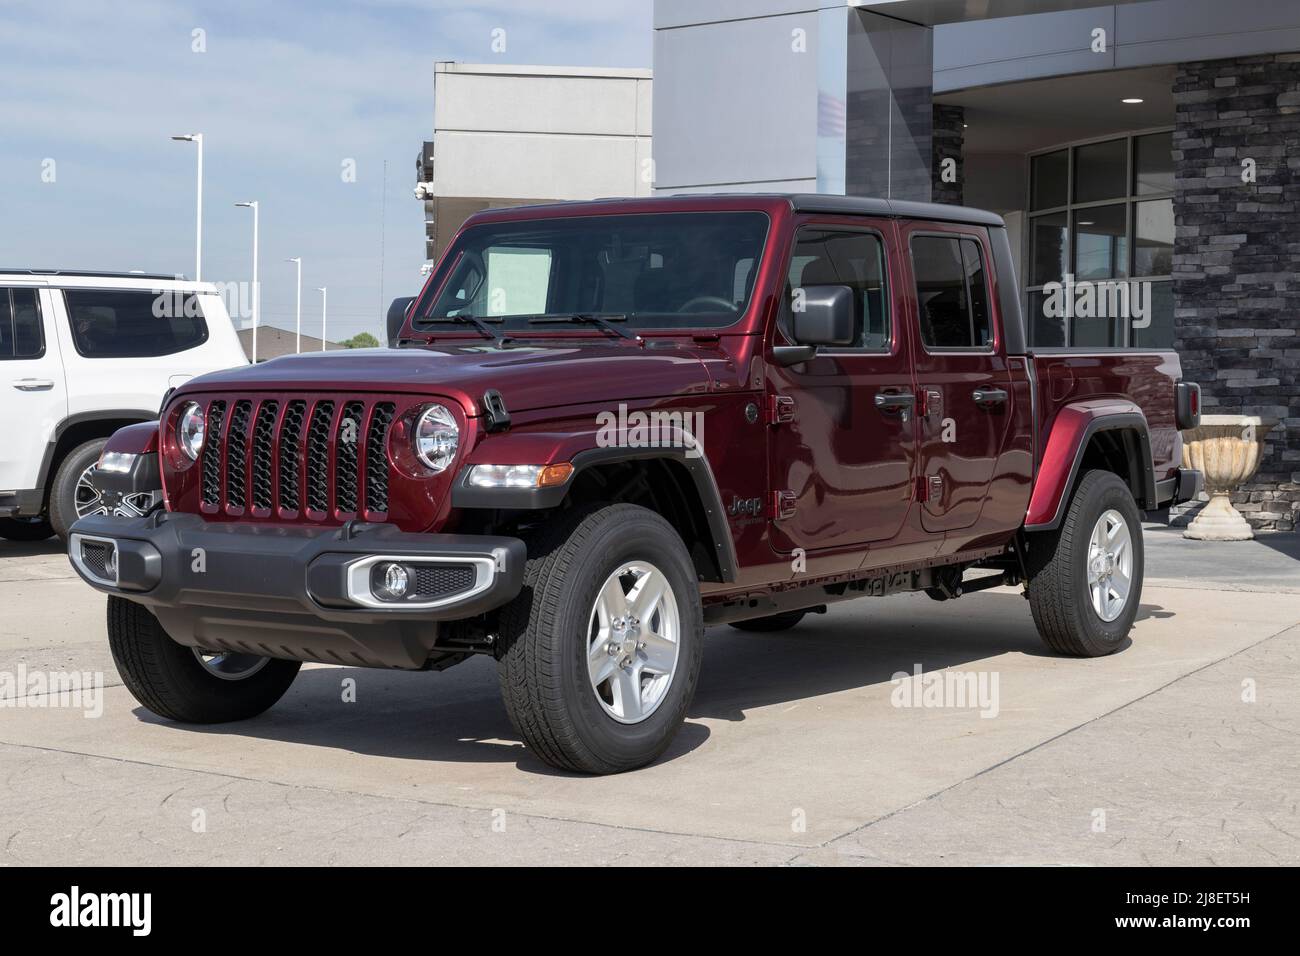 Kokomo - Circa May 2022: Jeep Gladiator display at a Stellantis dealer. The Jeep Gladiator models include the Sport, Willys, Rubicon and Mojave. Stock Photo